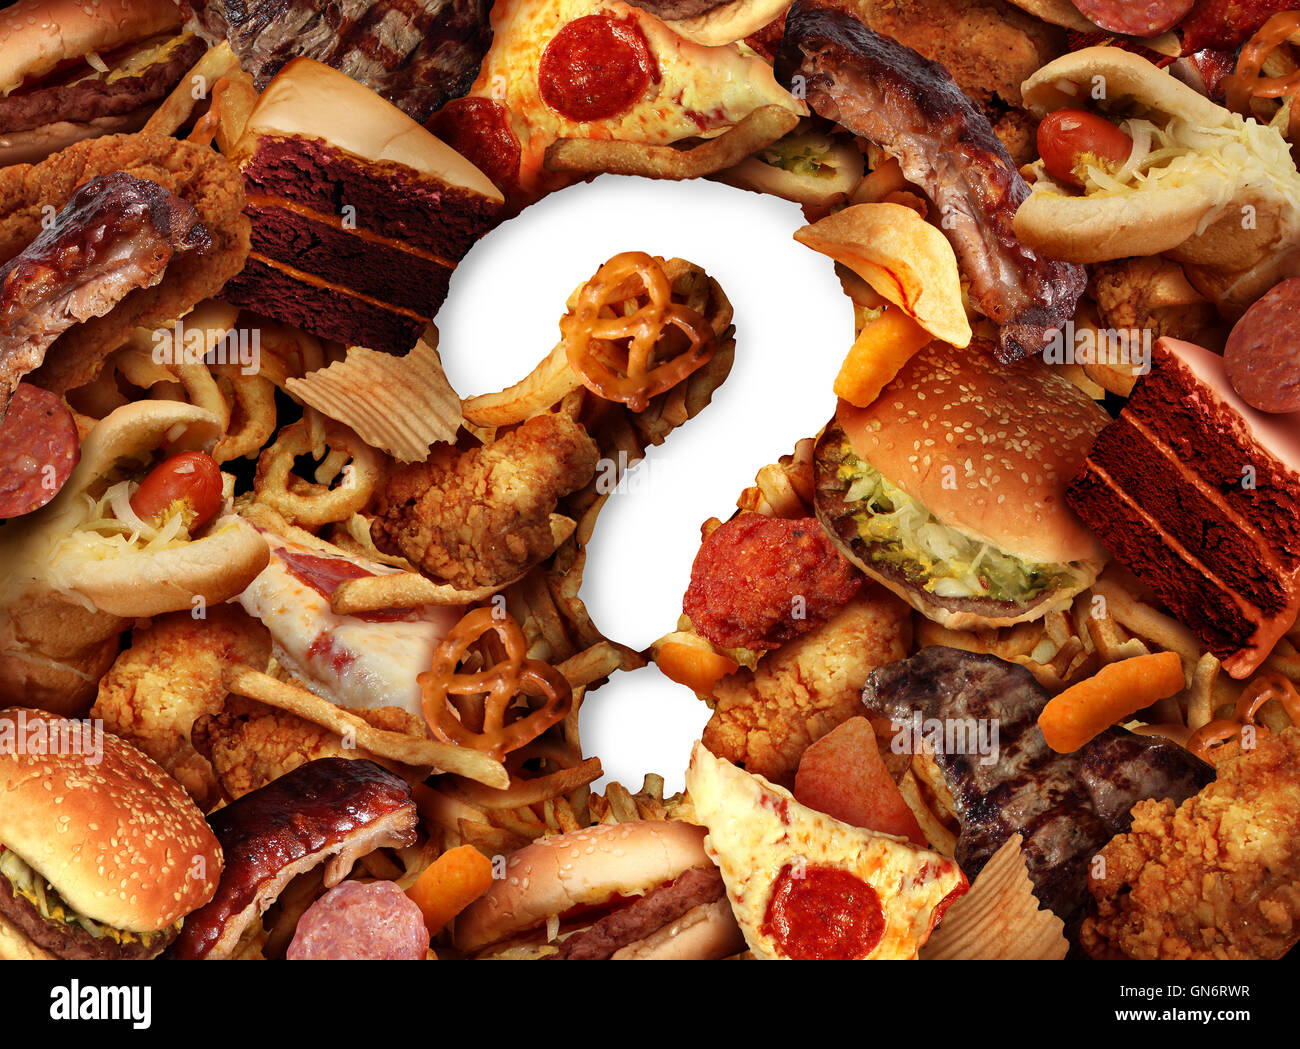 Unhealthy food choice concept and dieting questions concept and diet worries with greasy fried fast food take out as burgers hot dogs with fried chicken cake and pizza shaped as a question mark for eating uncertainty in a 3D illustration style. Stock Photo